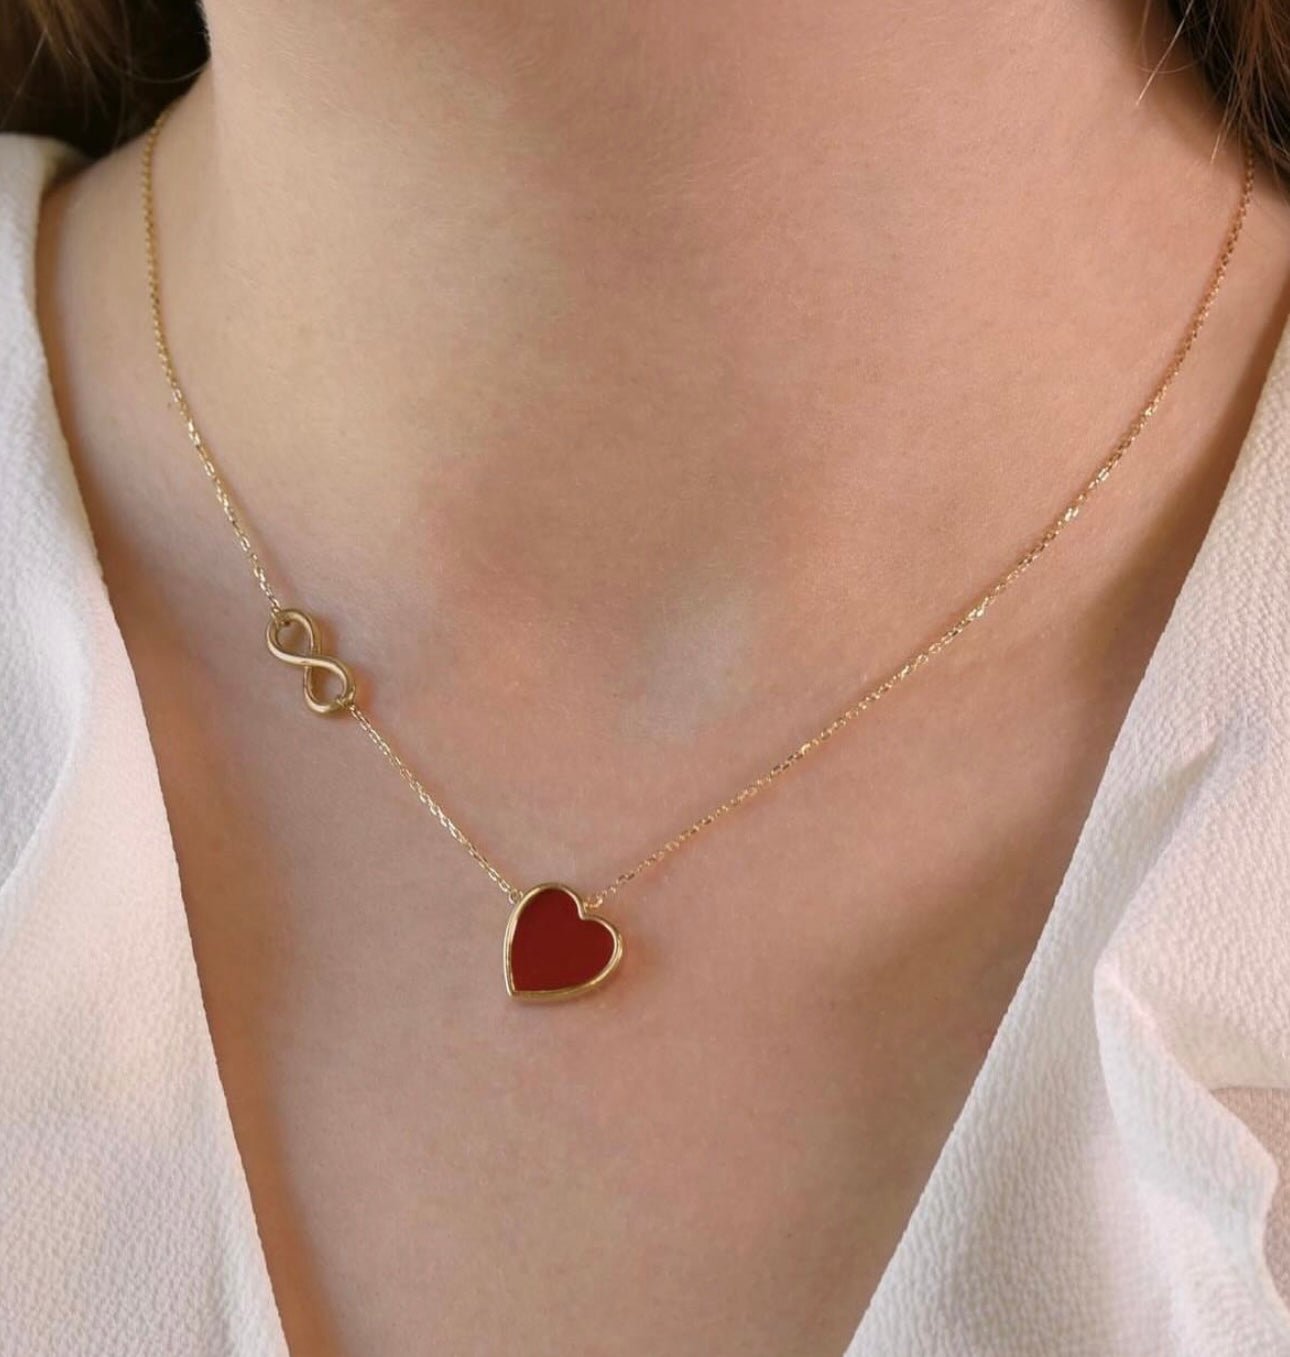 Heart and Infinity Necklace in Carnelian - 18k Gold - Ly